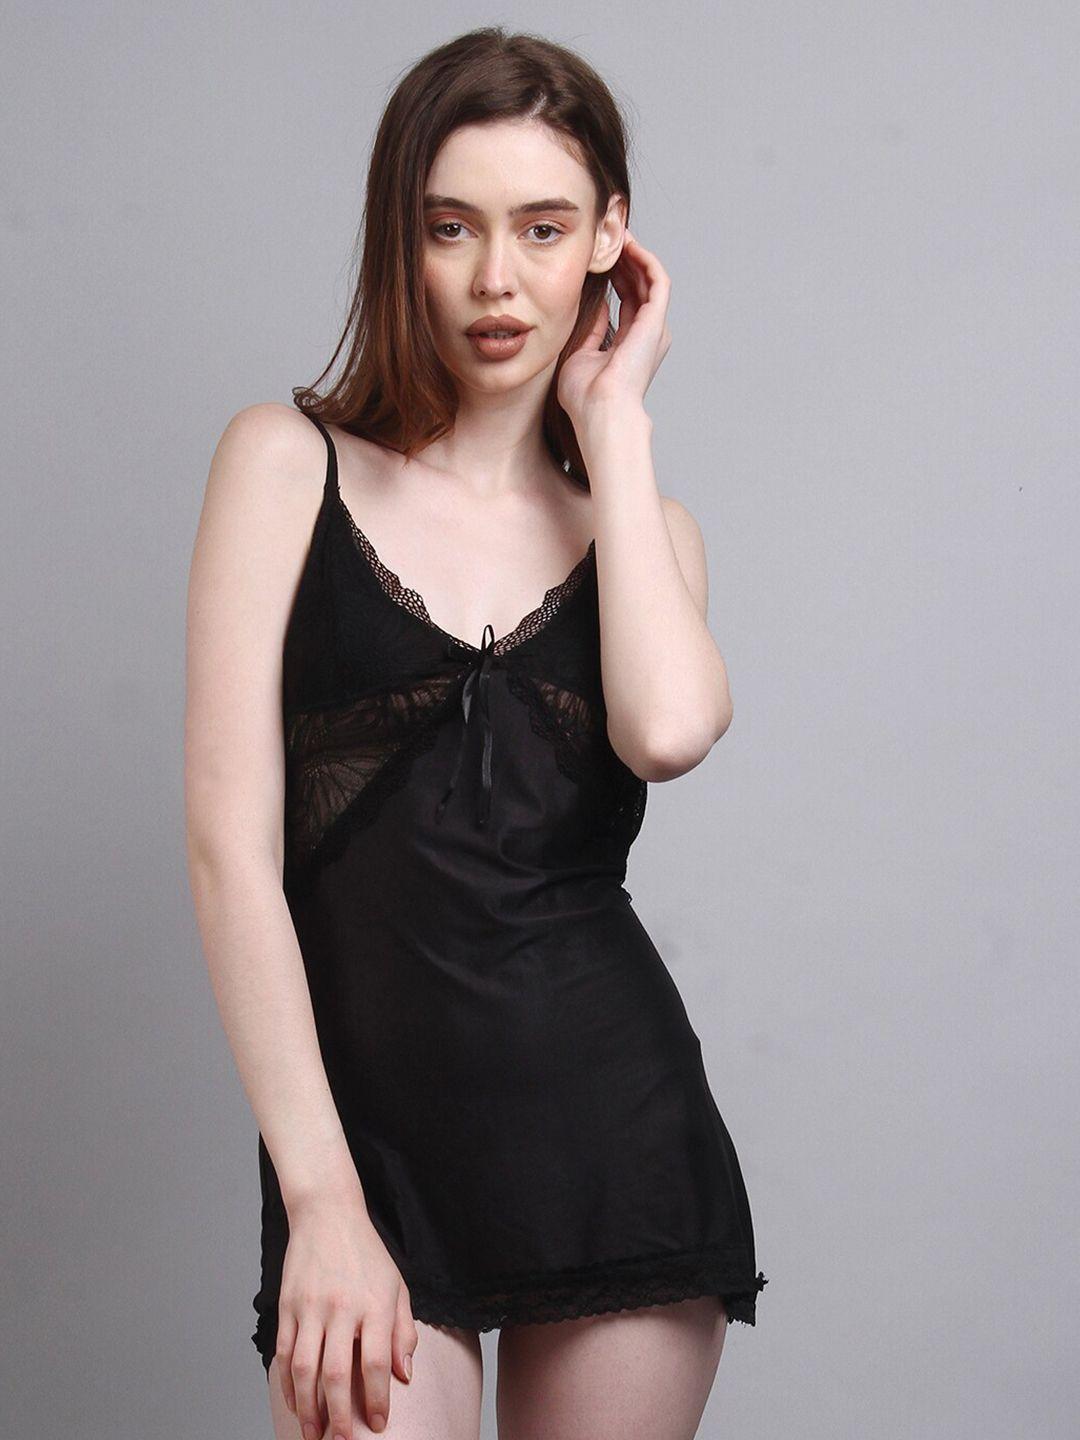 herryqeal-shoulder-straps-with-lace-soft-stretchable-&-comfortable-baby-doll